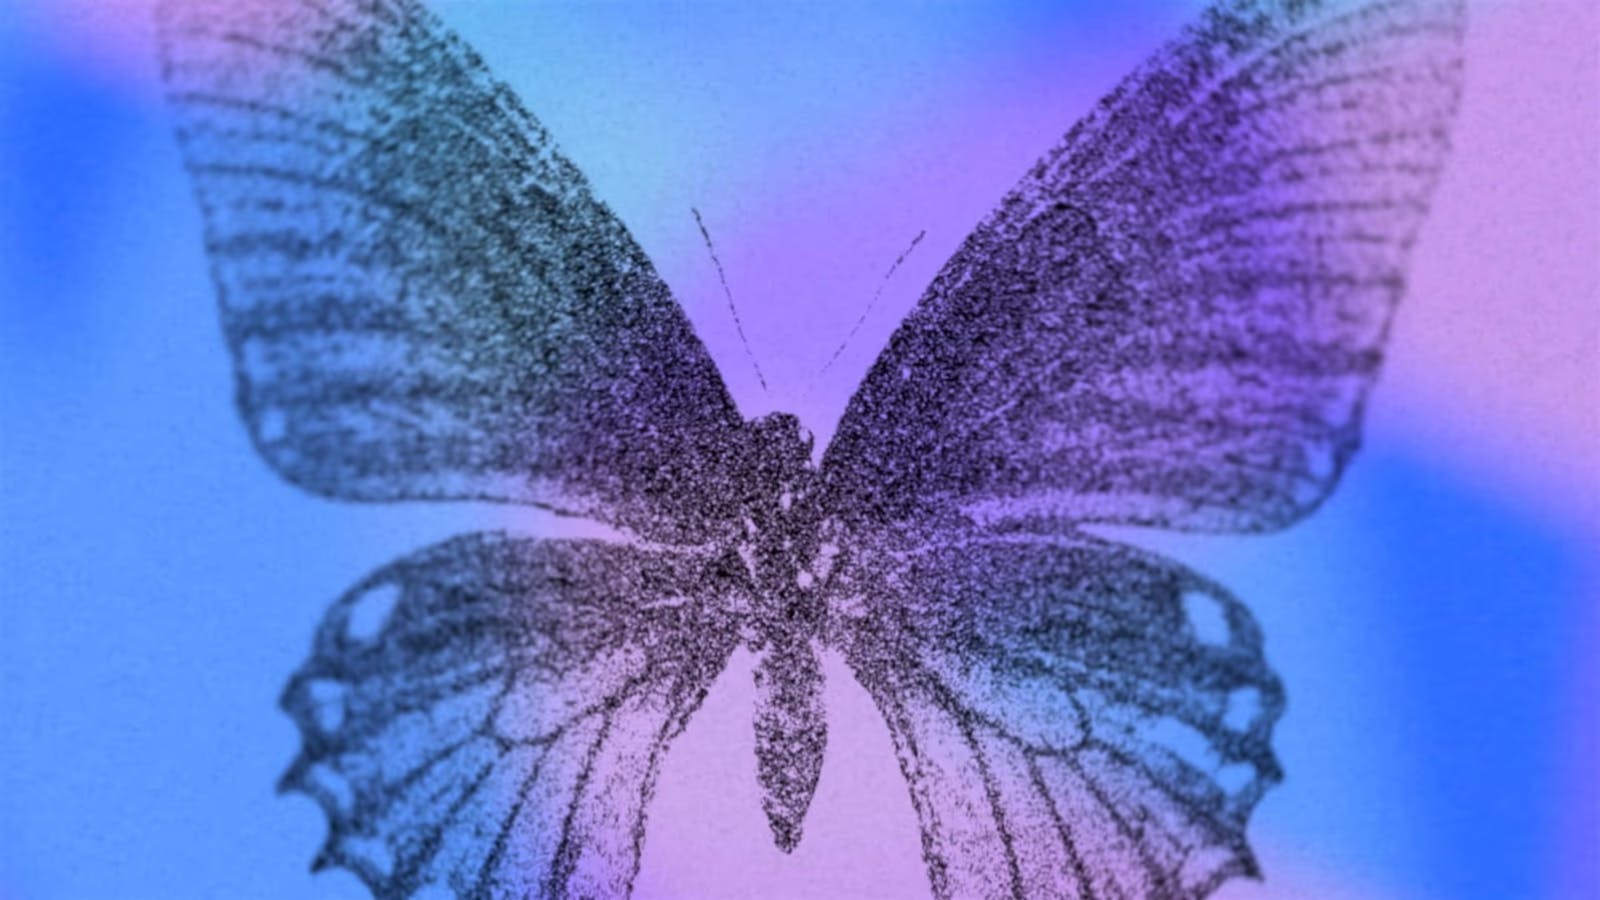 The Xanthopleura cover image: a stippled illustration of a moth on a blue and purple bakcground